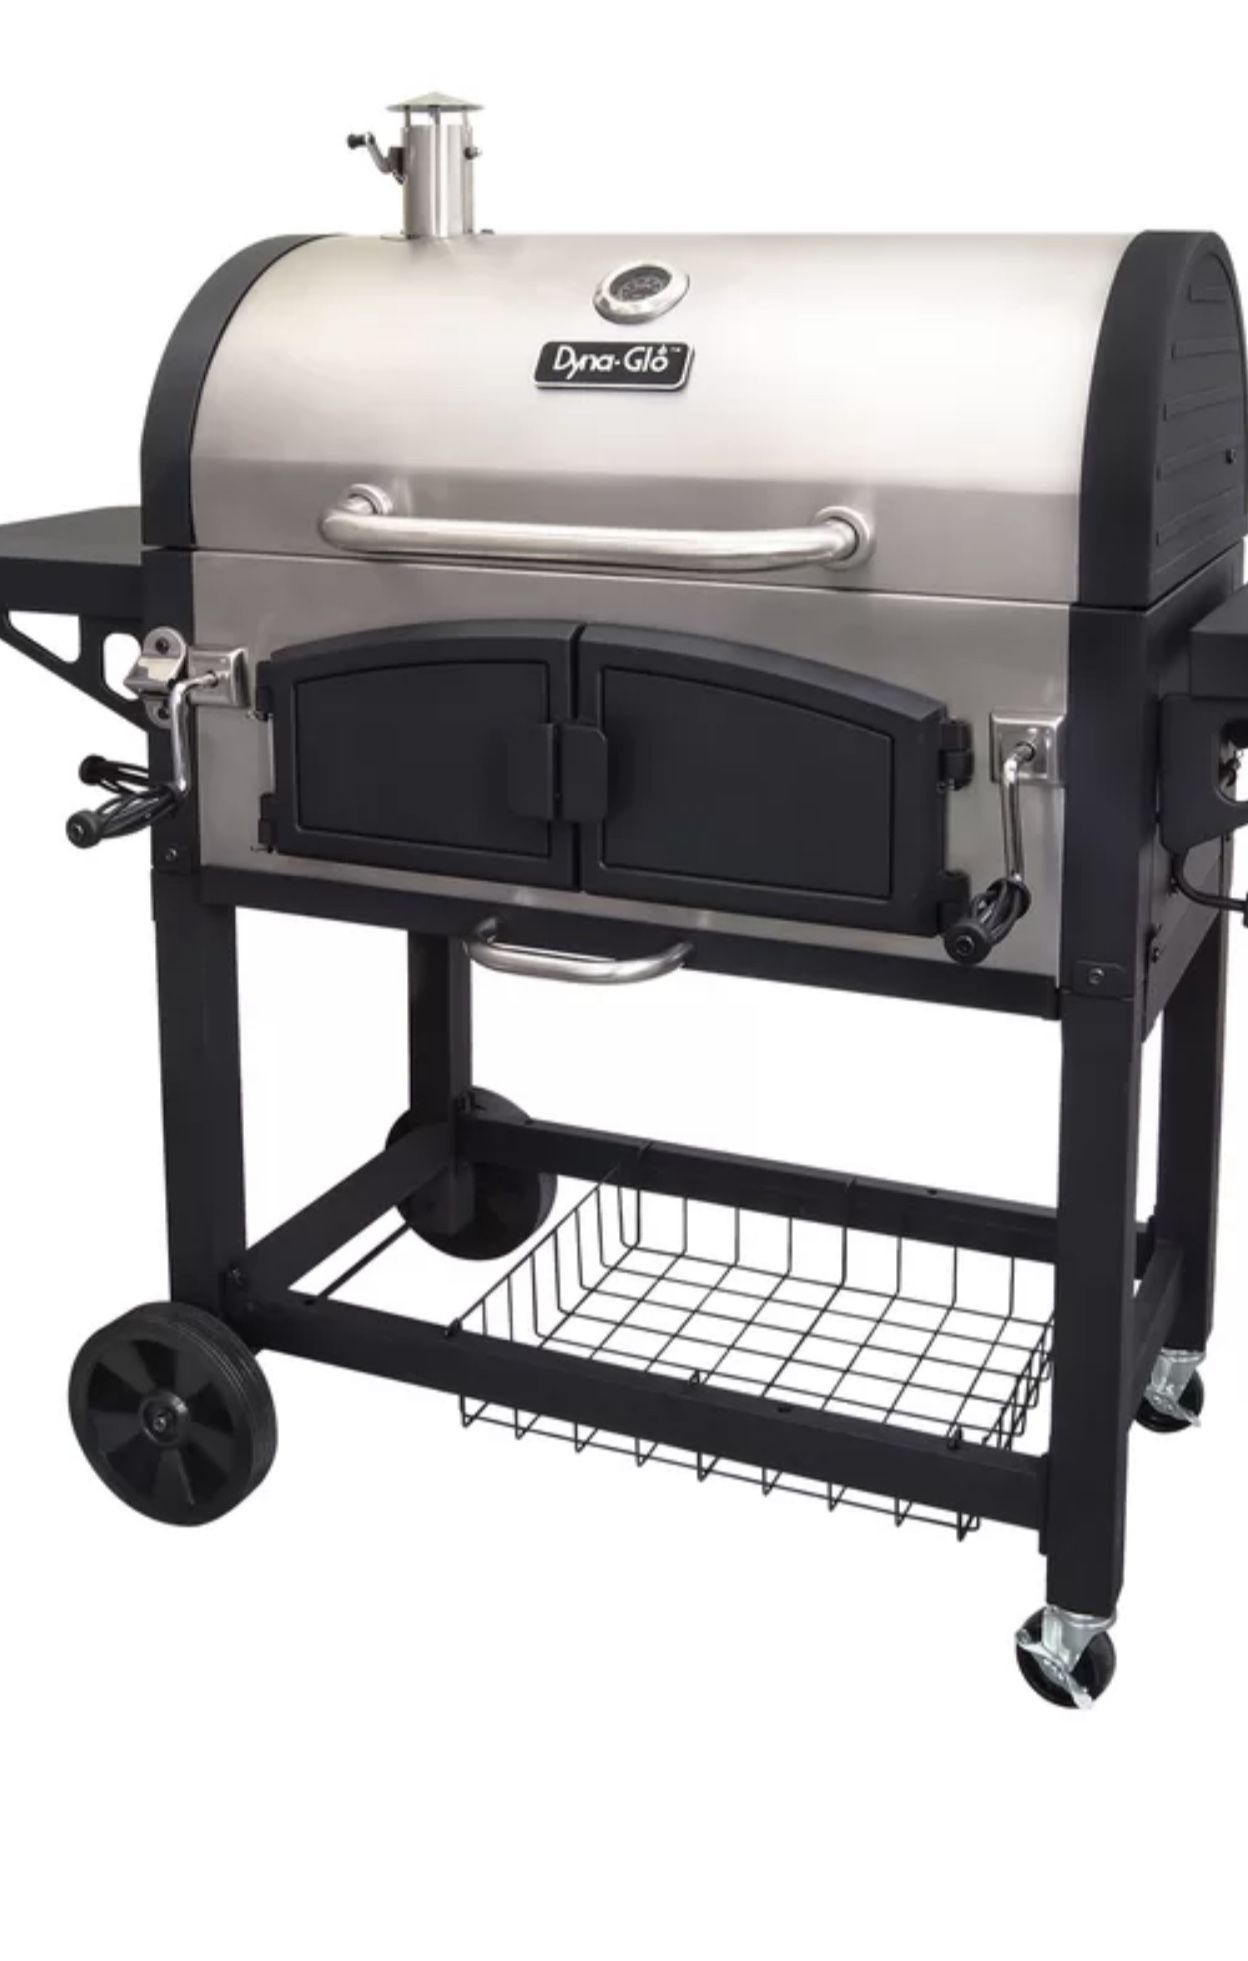 32 Inch Charcoal  Grill W It’s Cover New Never Used